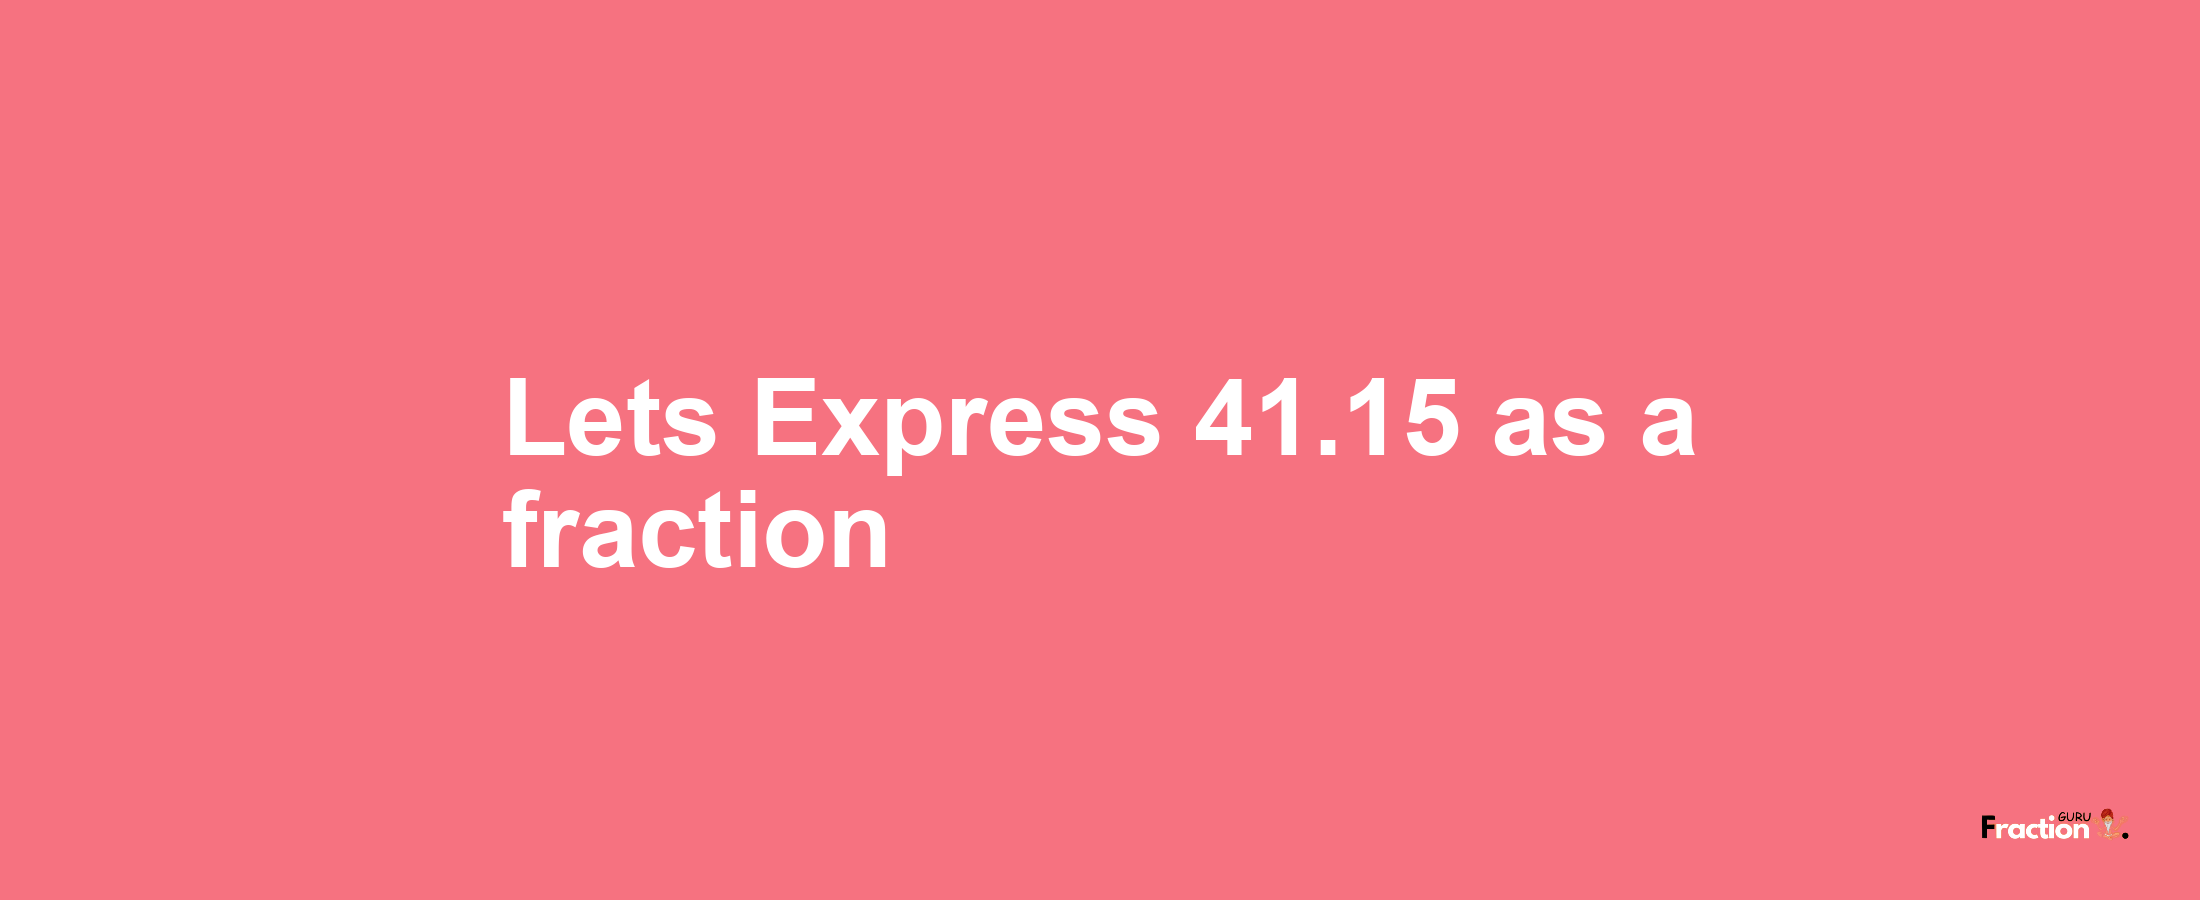 Lets Express 41.15 as afraction